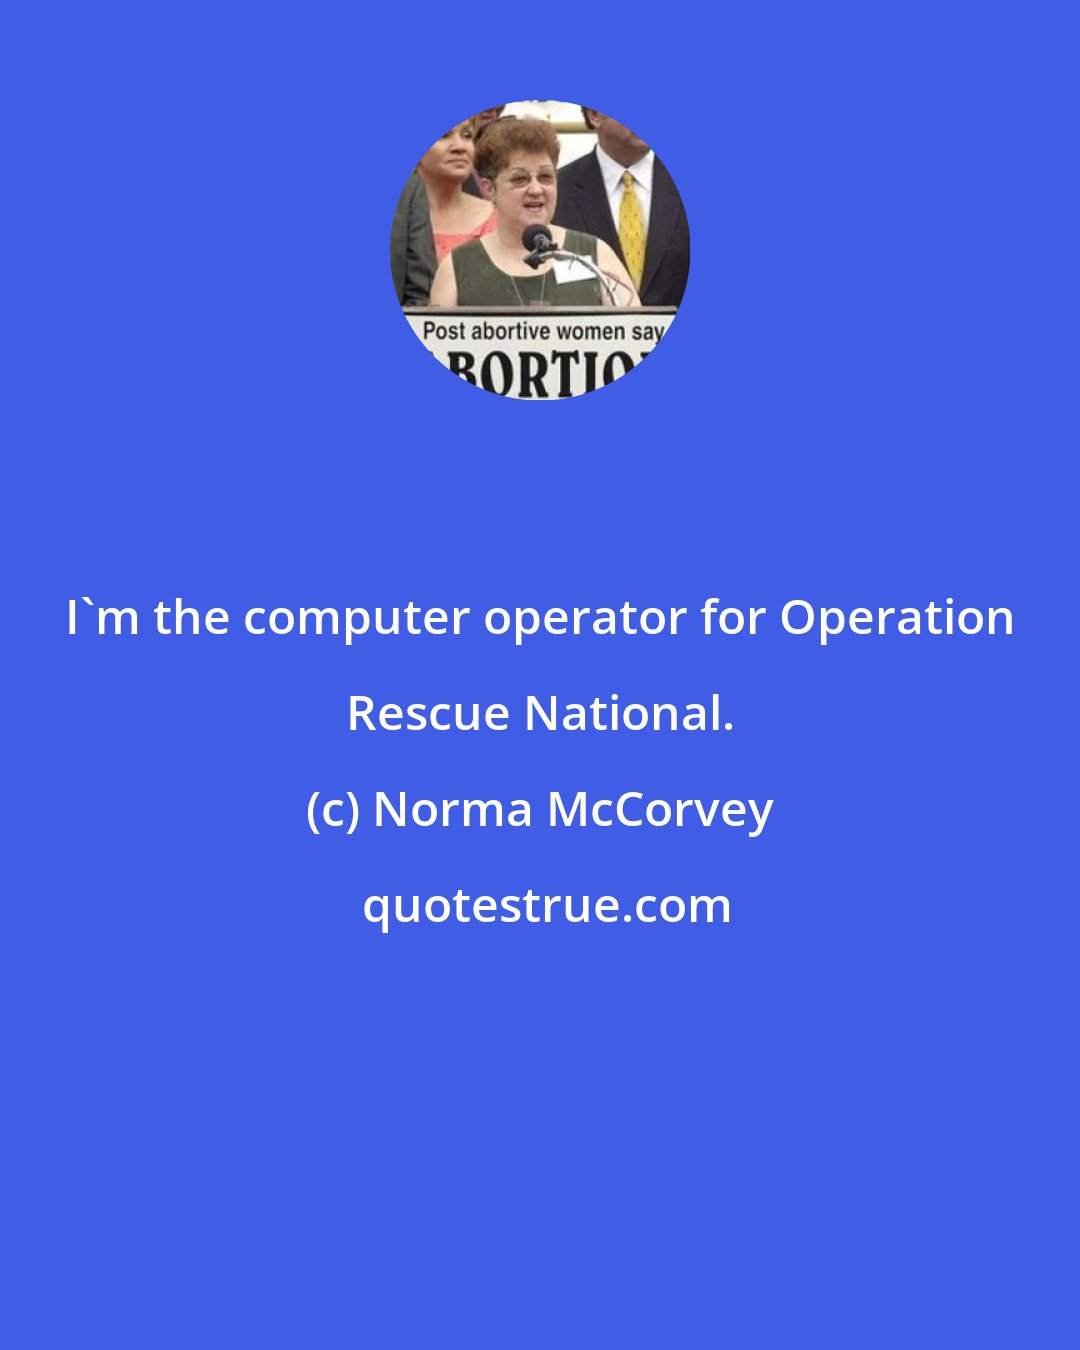 Norma McCorvey: I'm the computer operator for Operation Rescue National.